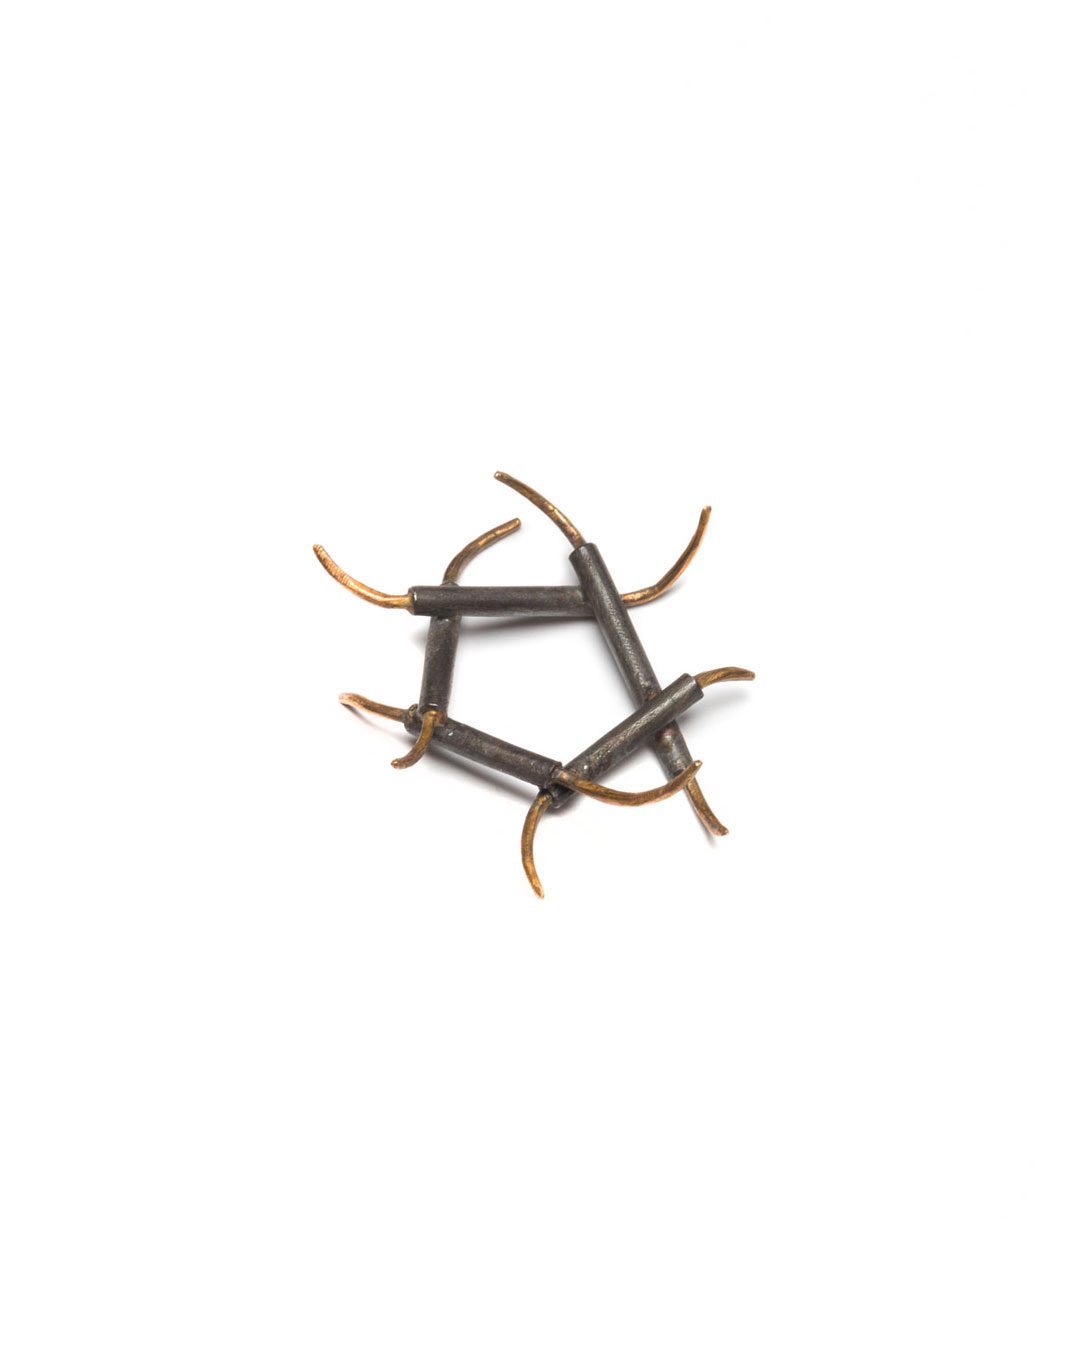 Winfried Krüger, untitled, 1996, ring; oxidised silver, gold, 40 x 40 mm, €605